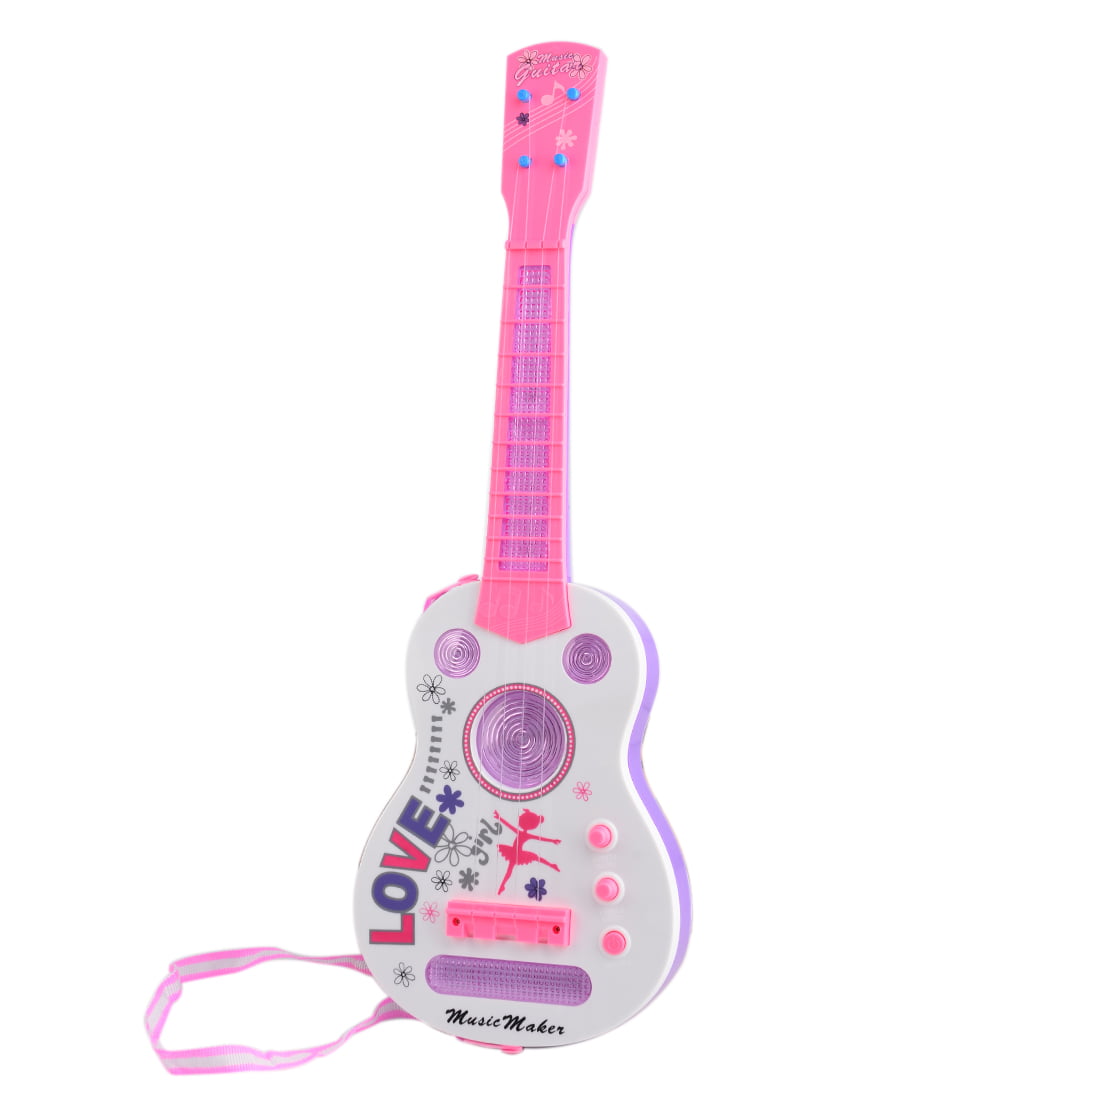 Susens Kids Children Can Play Simulation Guitar Toy Musical Instruments Toys Guitars & Strings